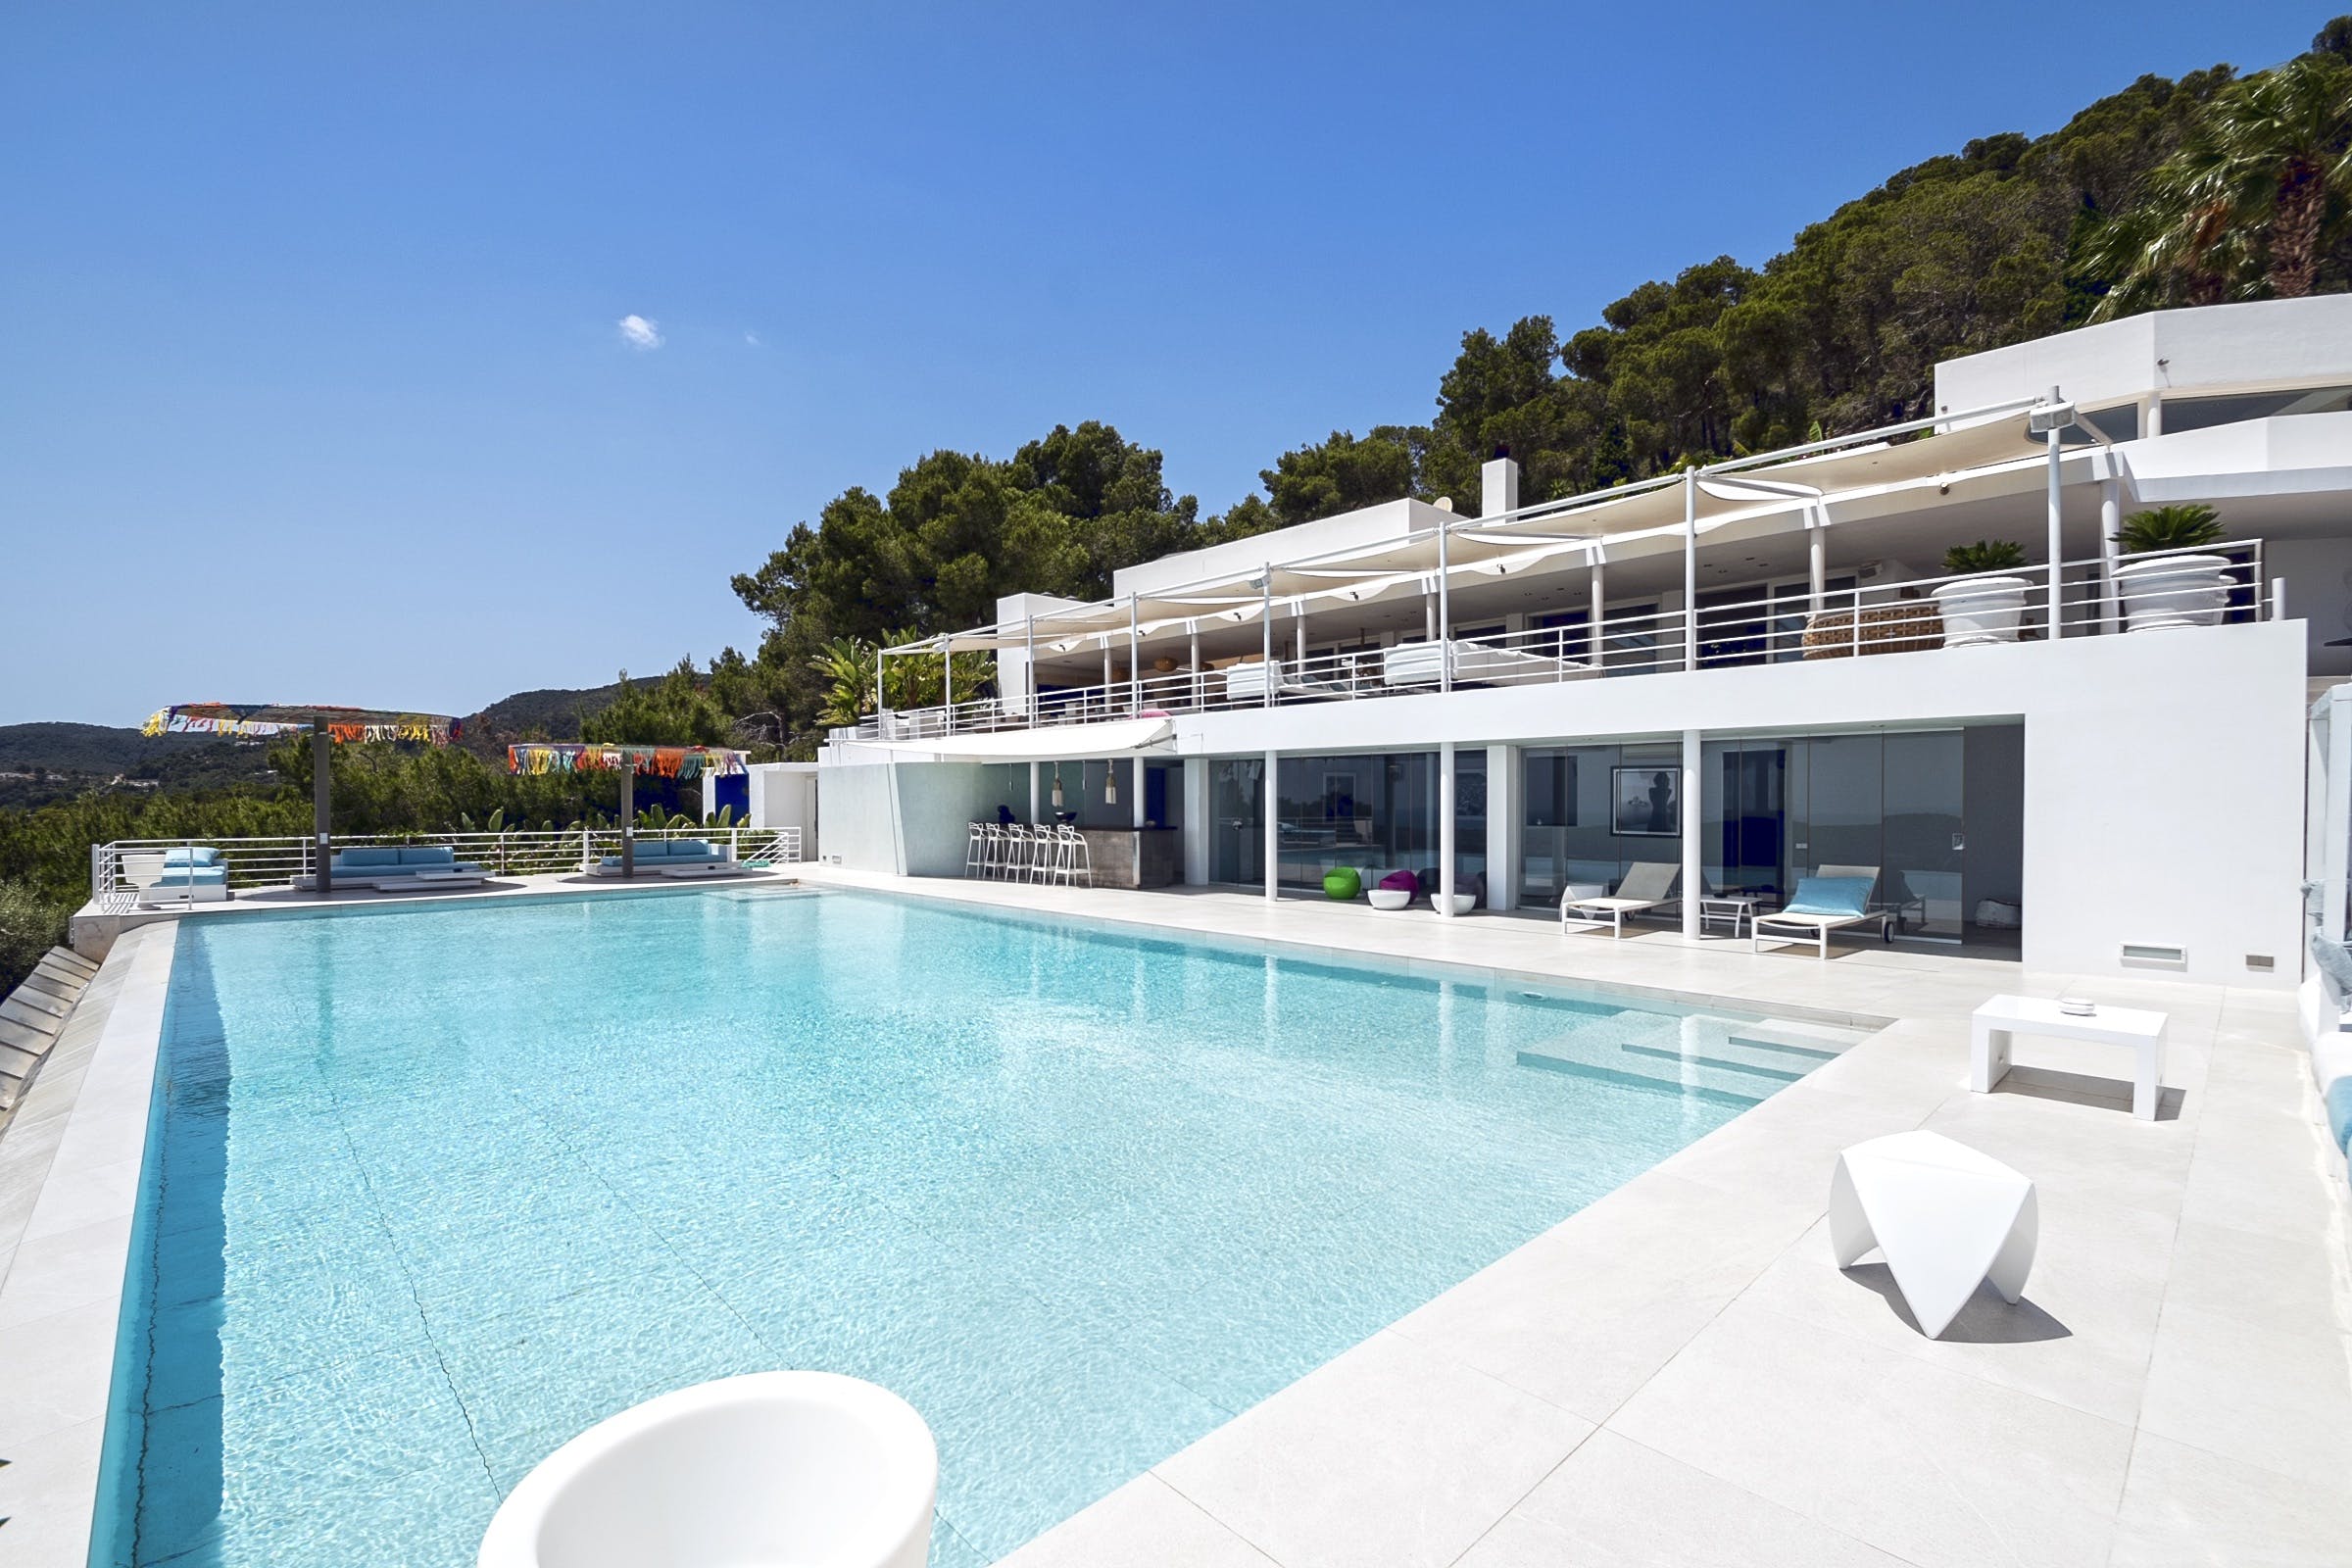 You are currently viewing Villa Pazu “Stunning luxury villa with panoramic views”